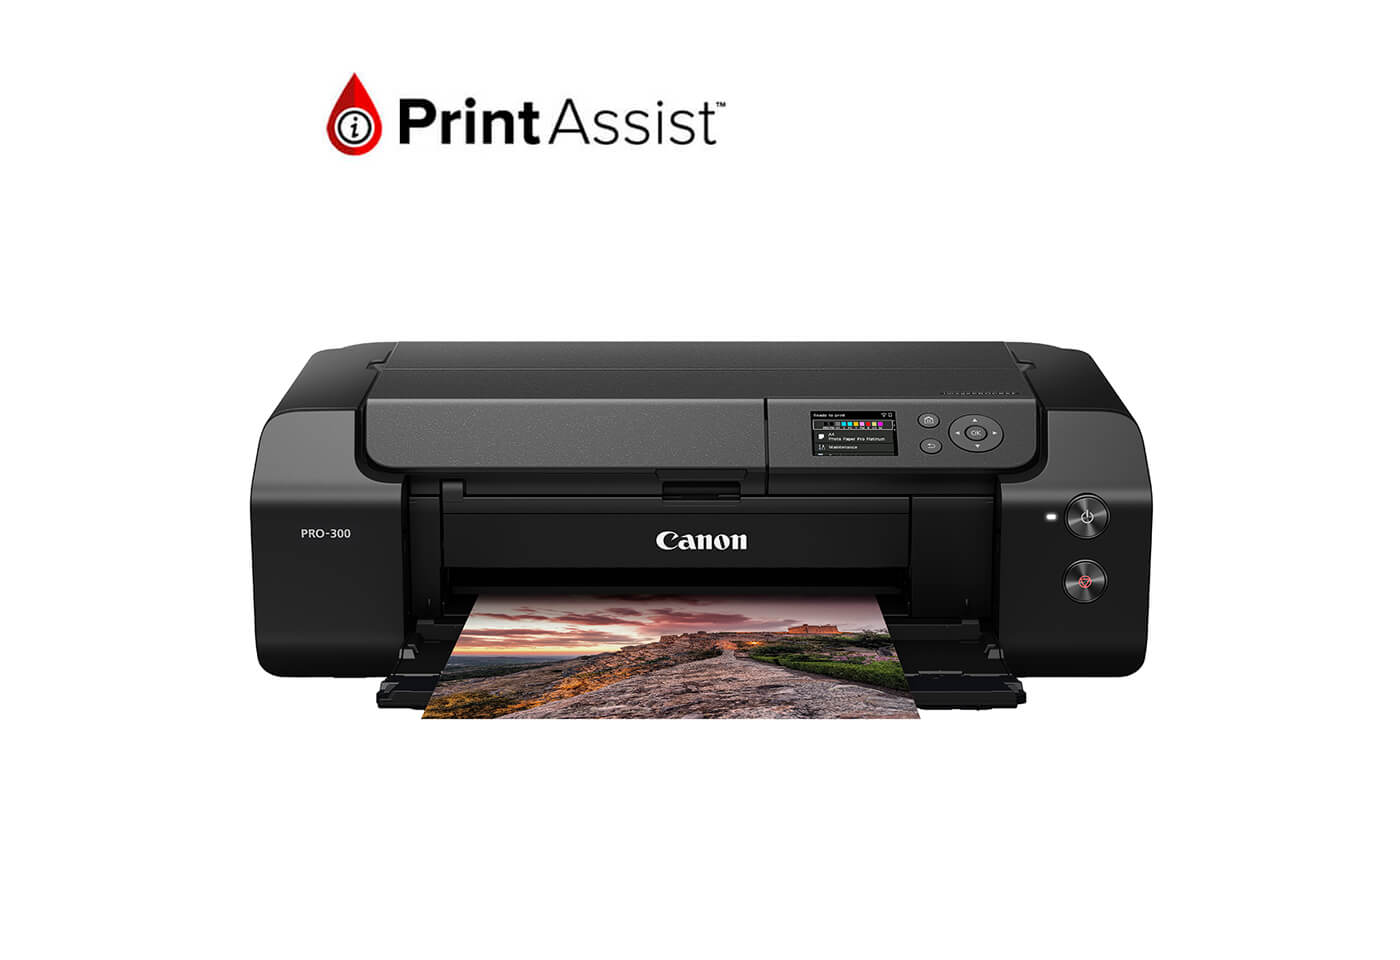 Product image of imagePROGRAF PRO-300 with Print Assist